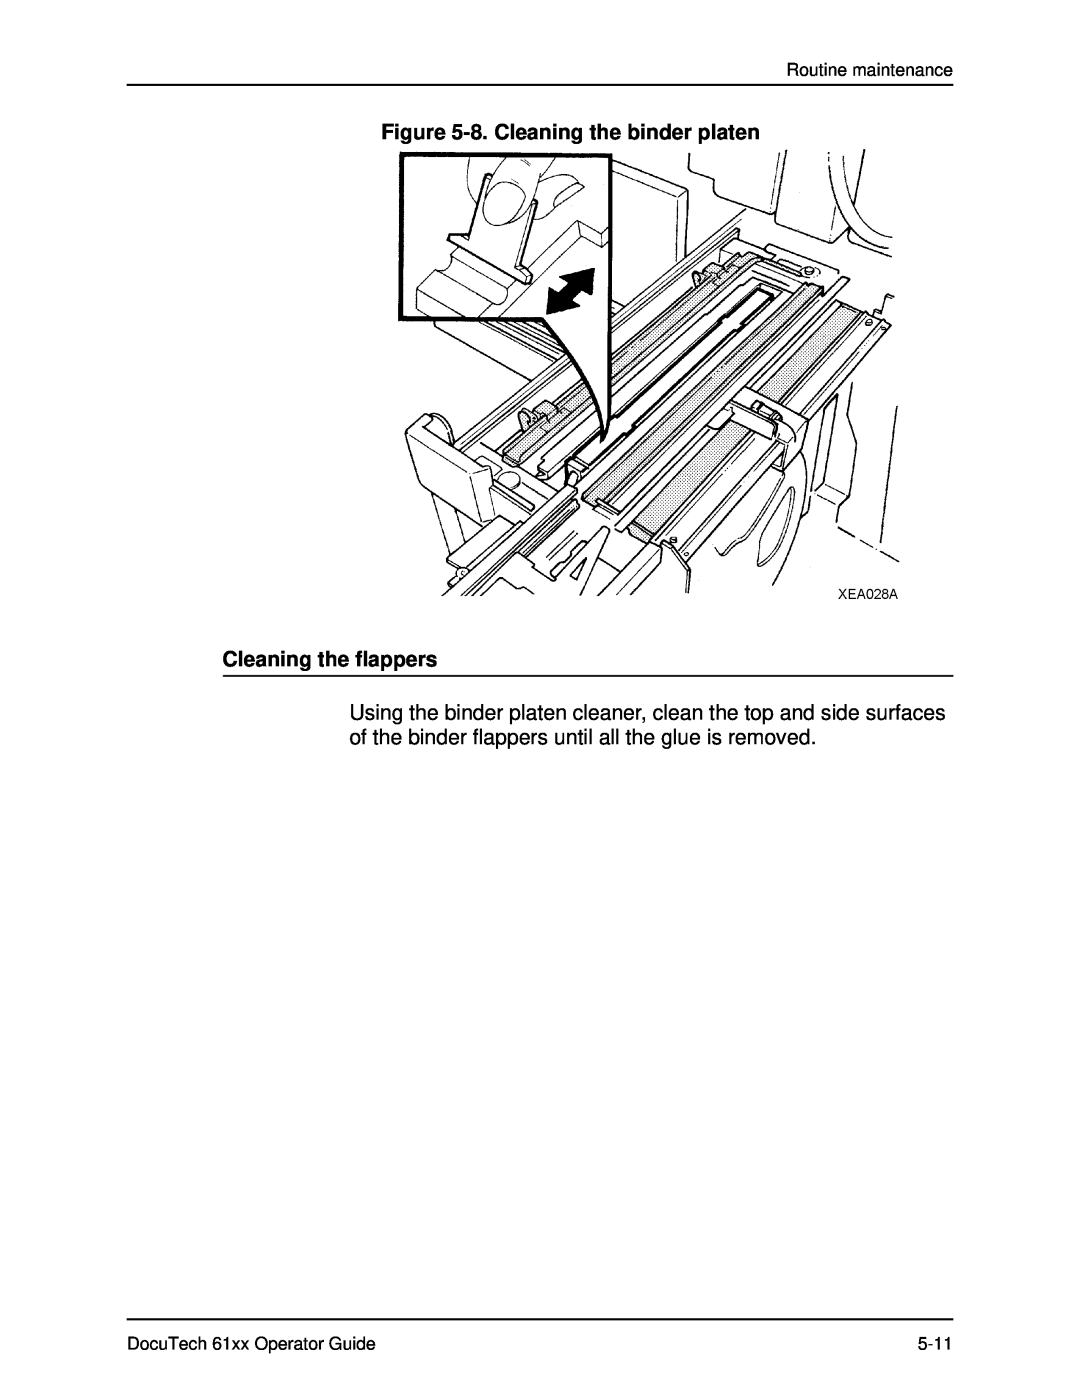 Xerox 61xx manual 8. Cleaning the binder platen Cleaning the flappers 